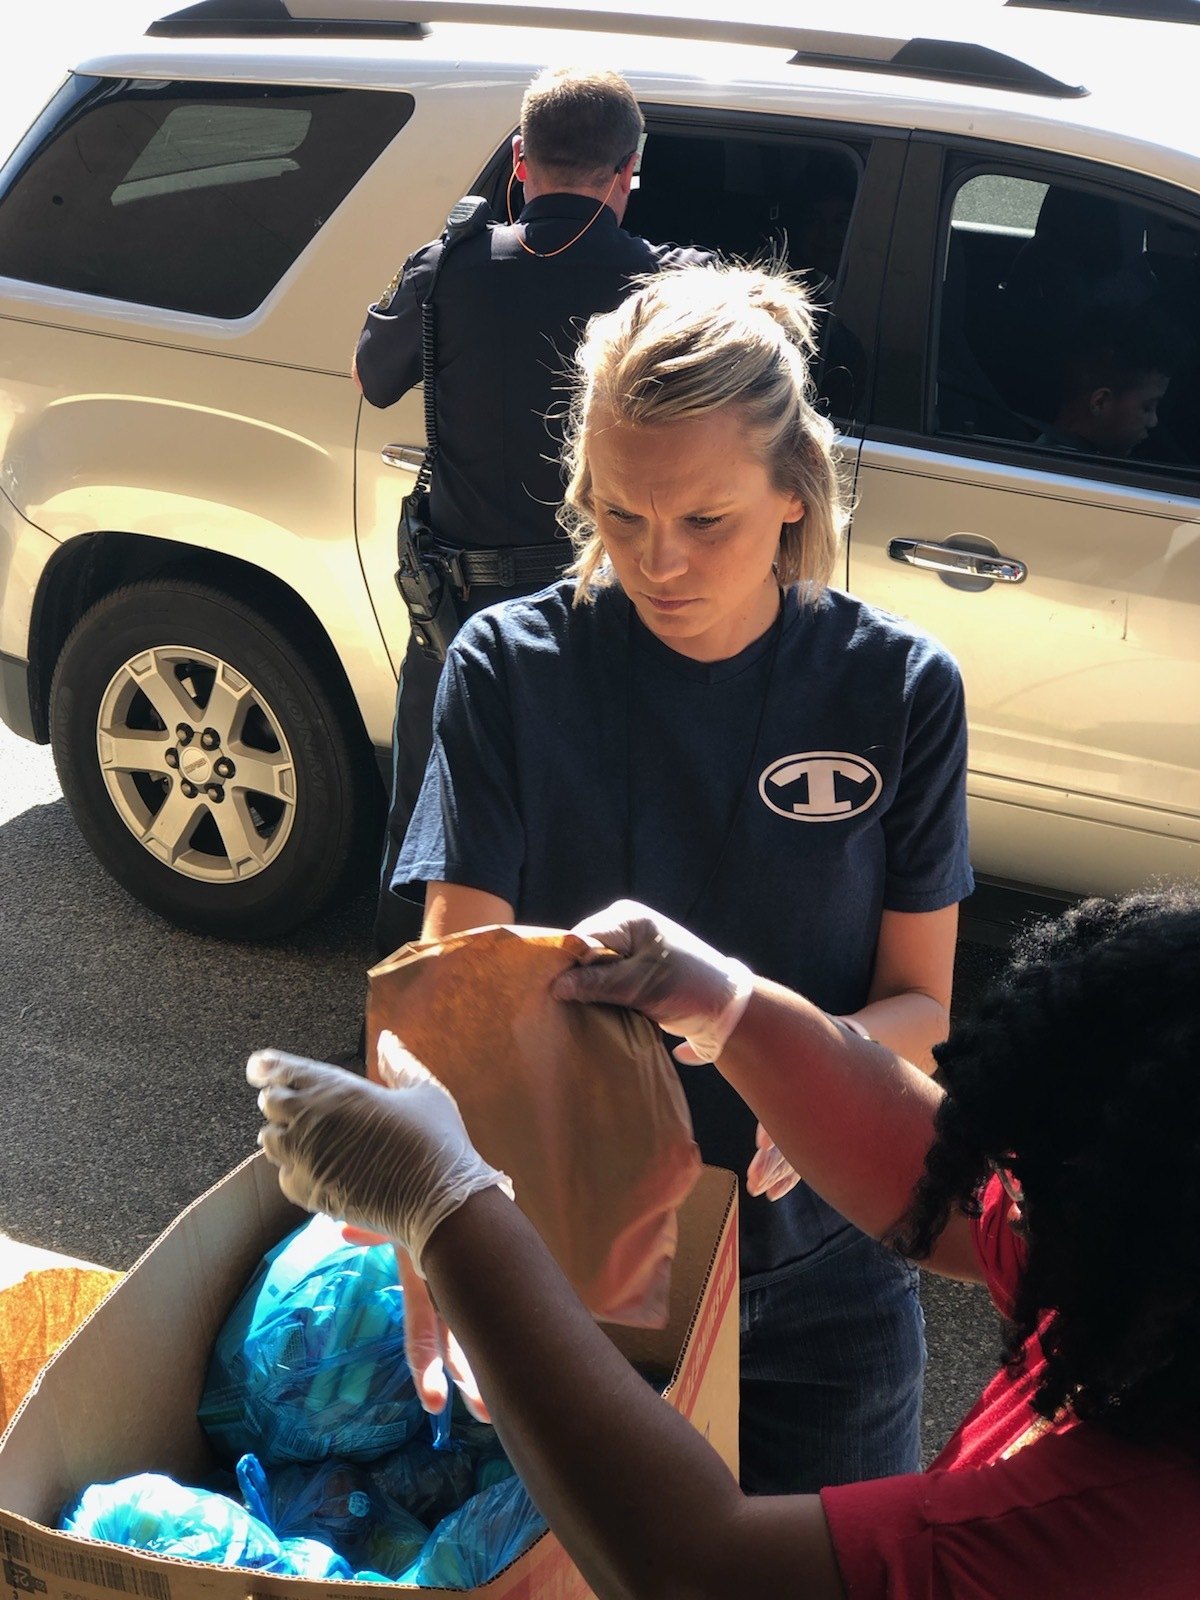 handing out sack lunches in Tift County, Georgia May 2020